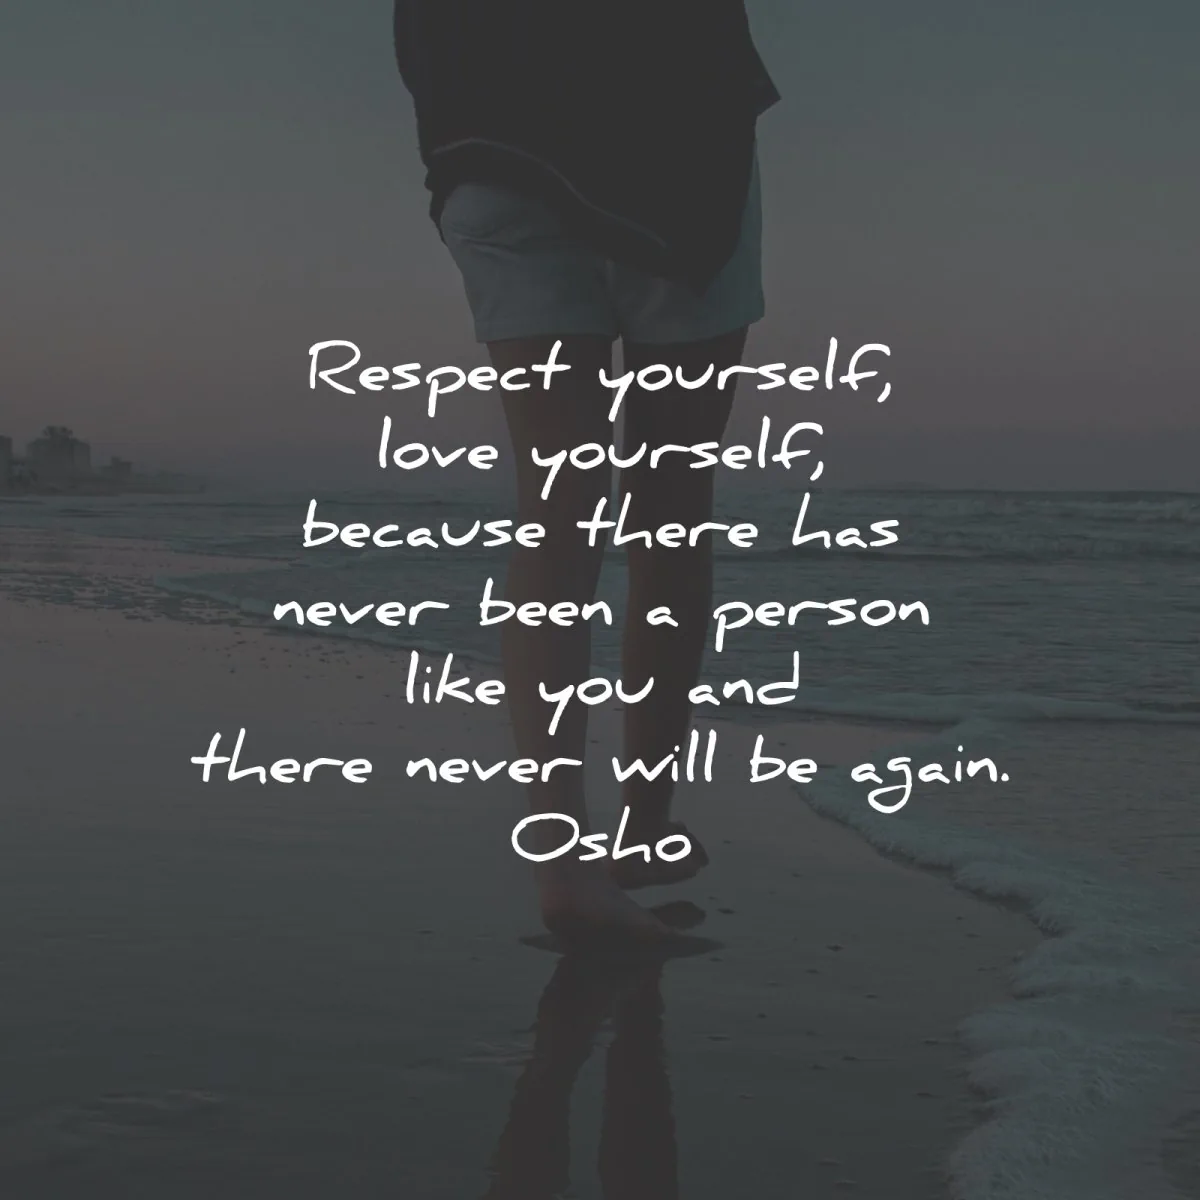 love yourself quotes respect because never been person osho wisdom